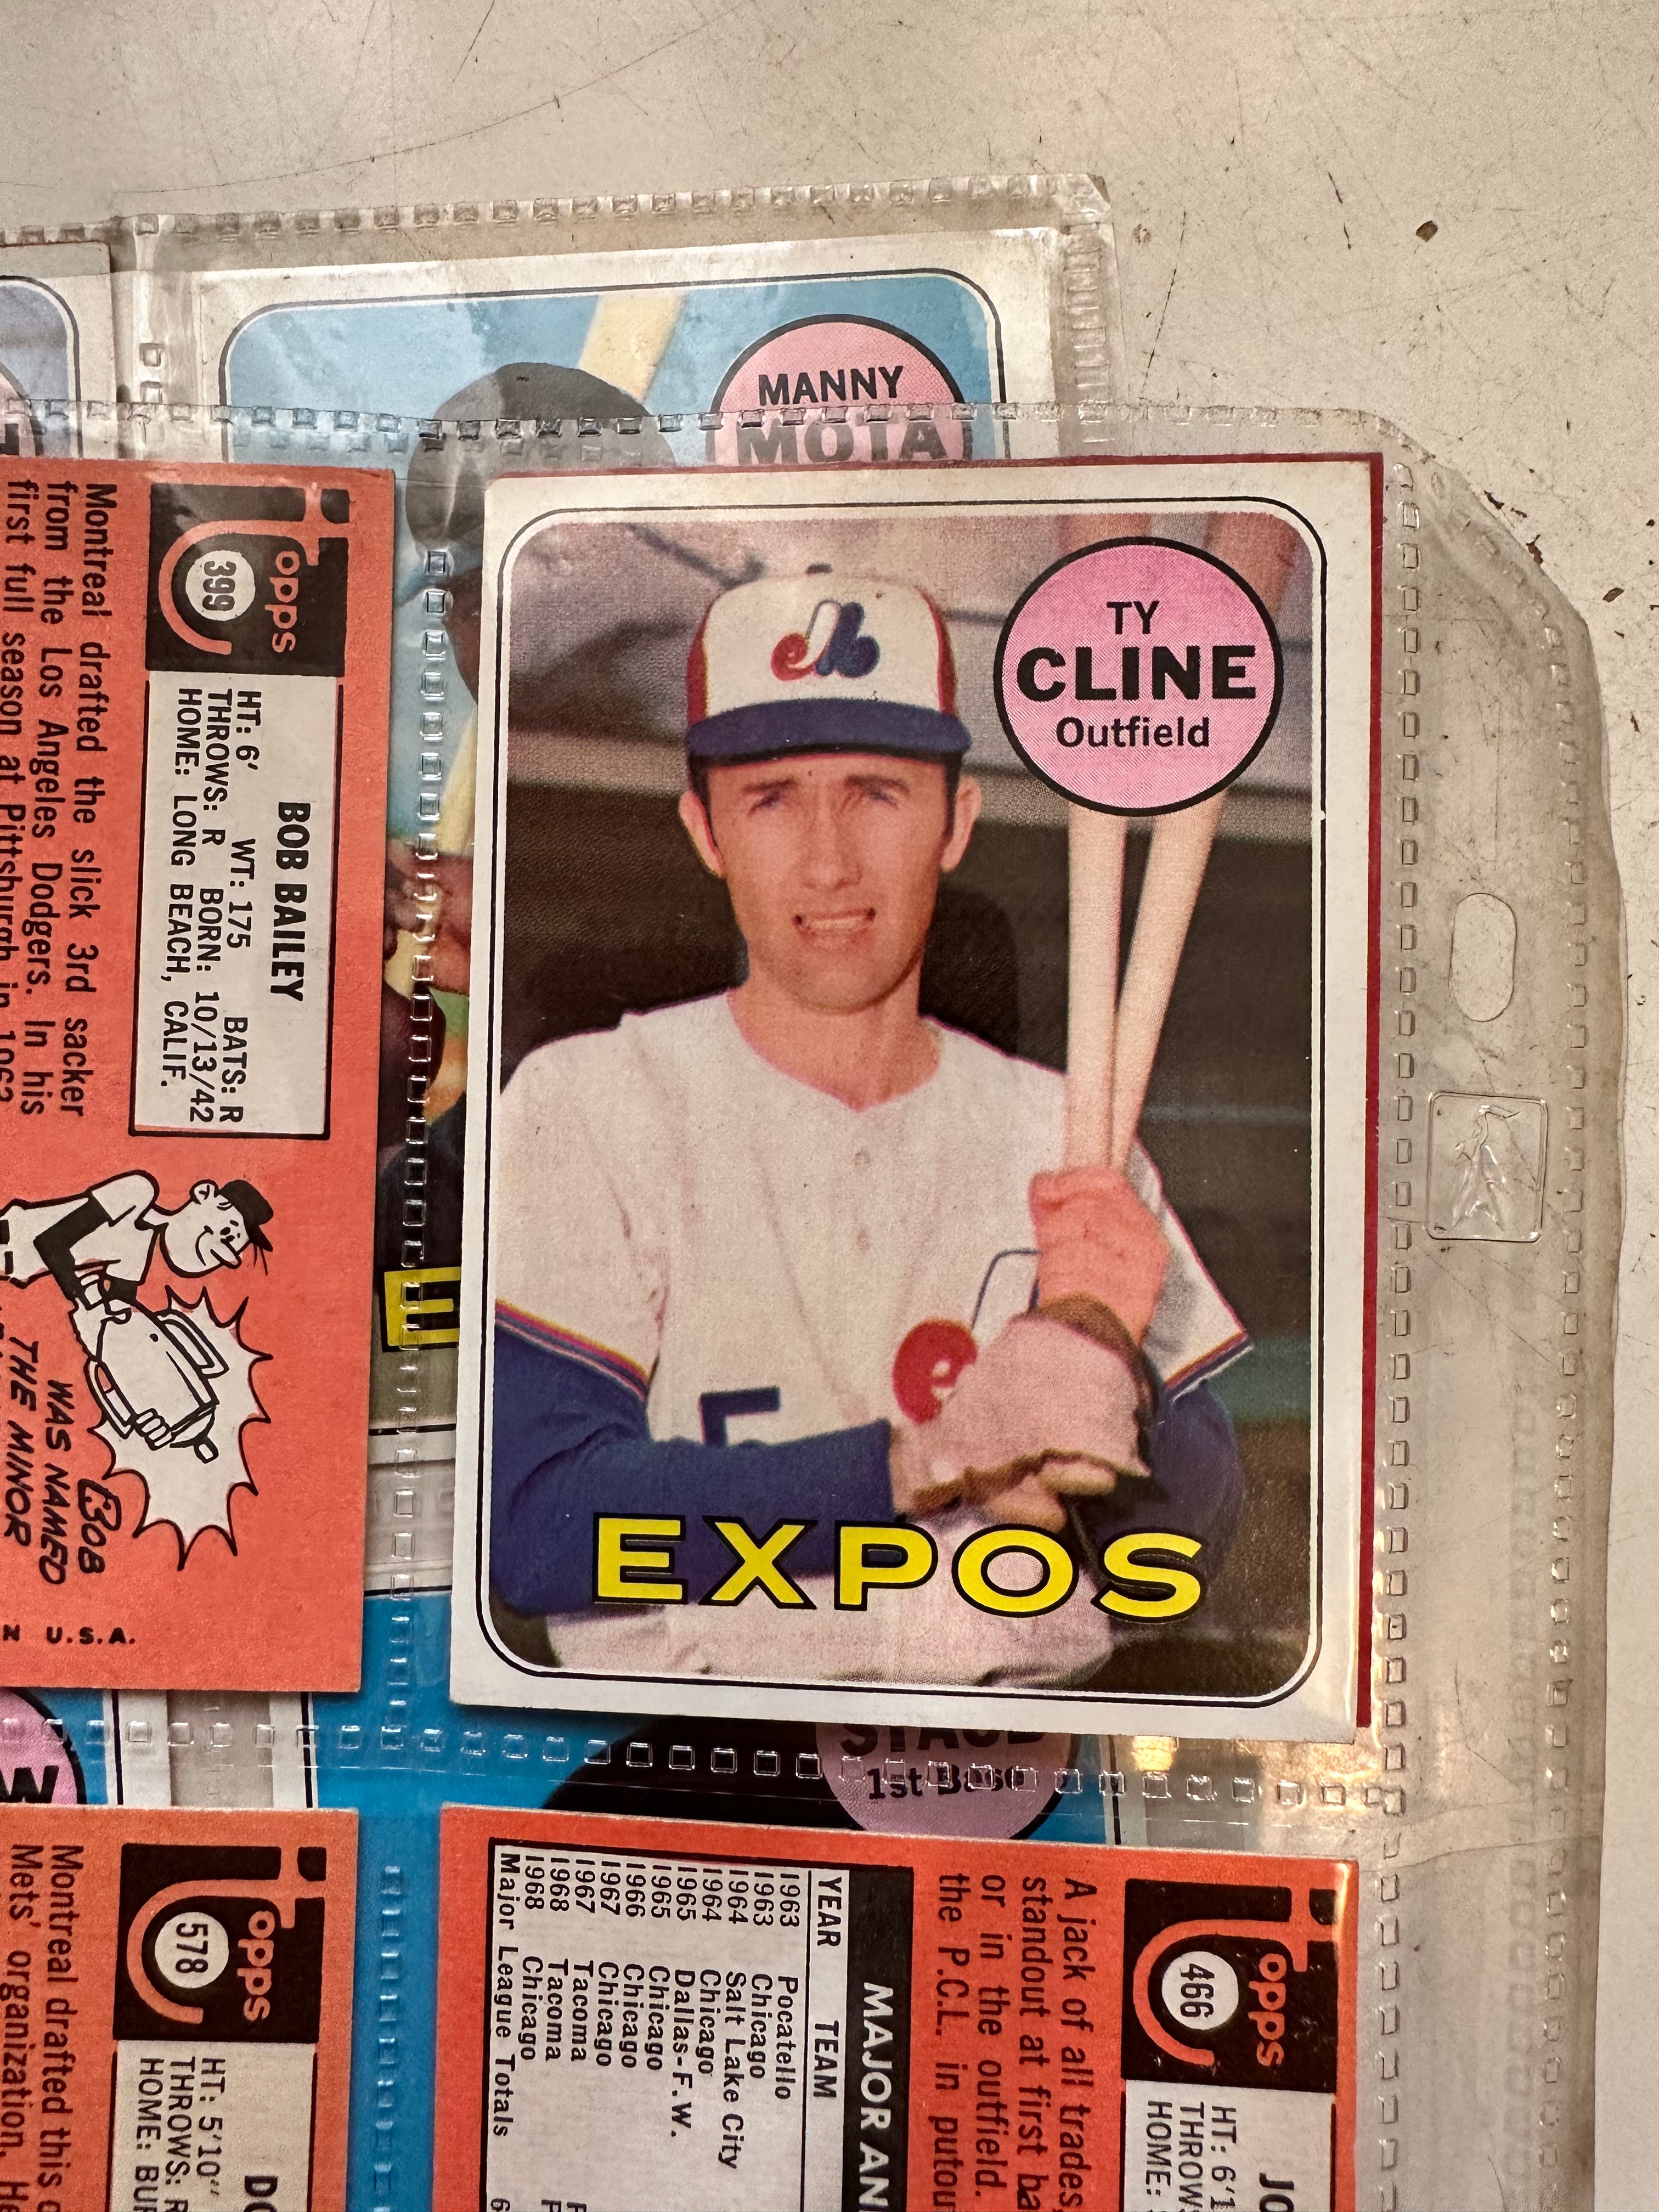 1969 Montreal Expos baseball first year 21 cards lots deal